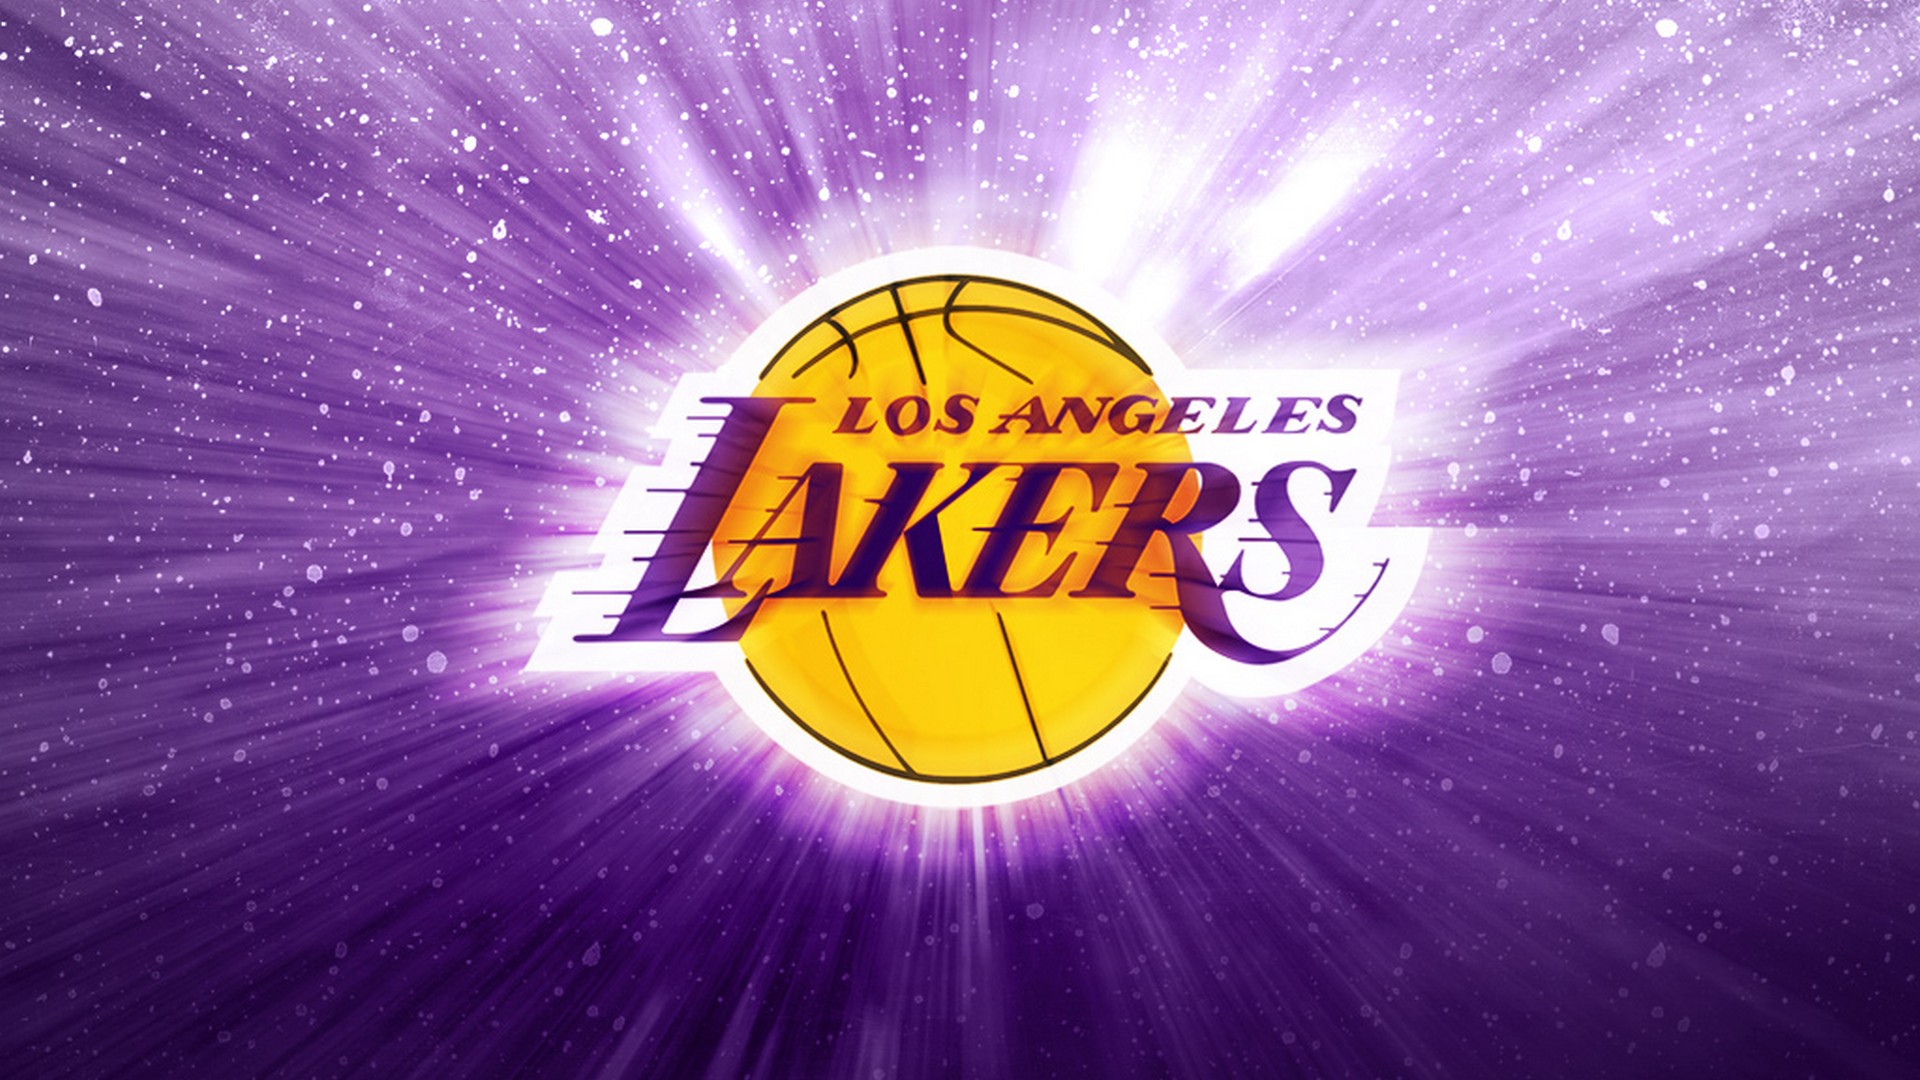 LA Lakers Wallpaper with image dimensions 1920x1080 pixel. You can make this wallpaper for your Desktop Computer Backgrounds, Windows or Mac Screensavers, iPhone Lock screen, Tablet or Android and another Mobile Phone device